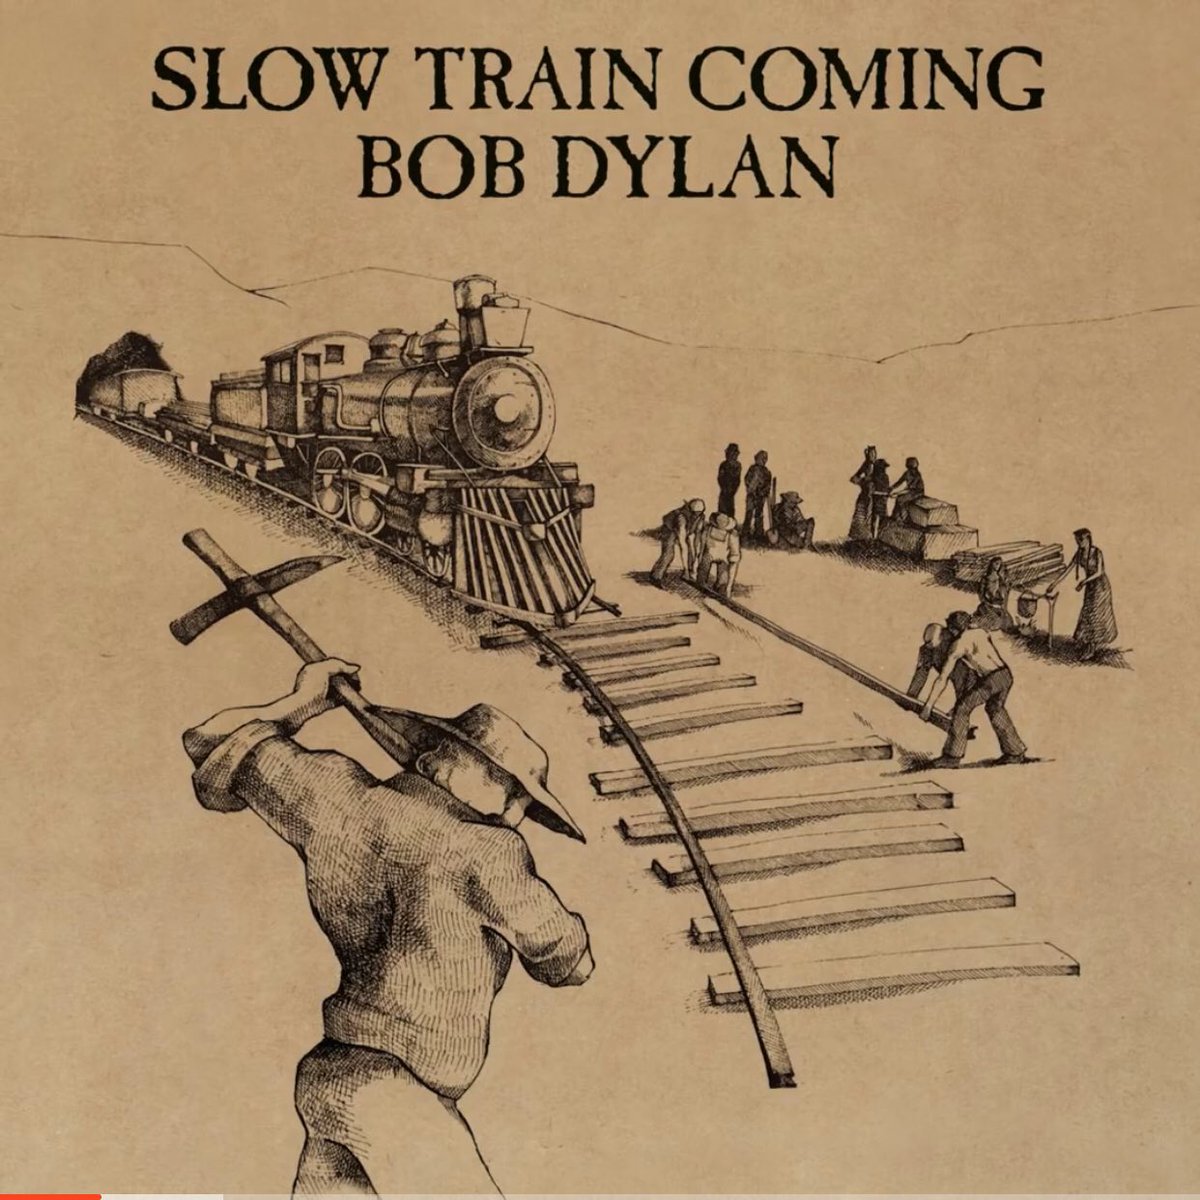 21. Please keep your eyes peeled. Your mind well-oxygenated, your plans liquid-flexible, your body strong and your ear pressed tightly to that rail. There’s a slow train comin’